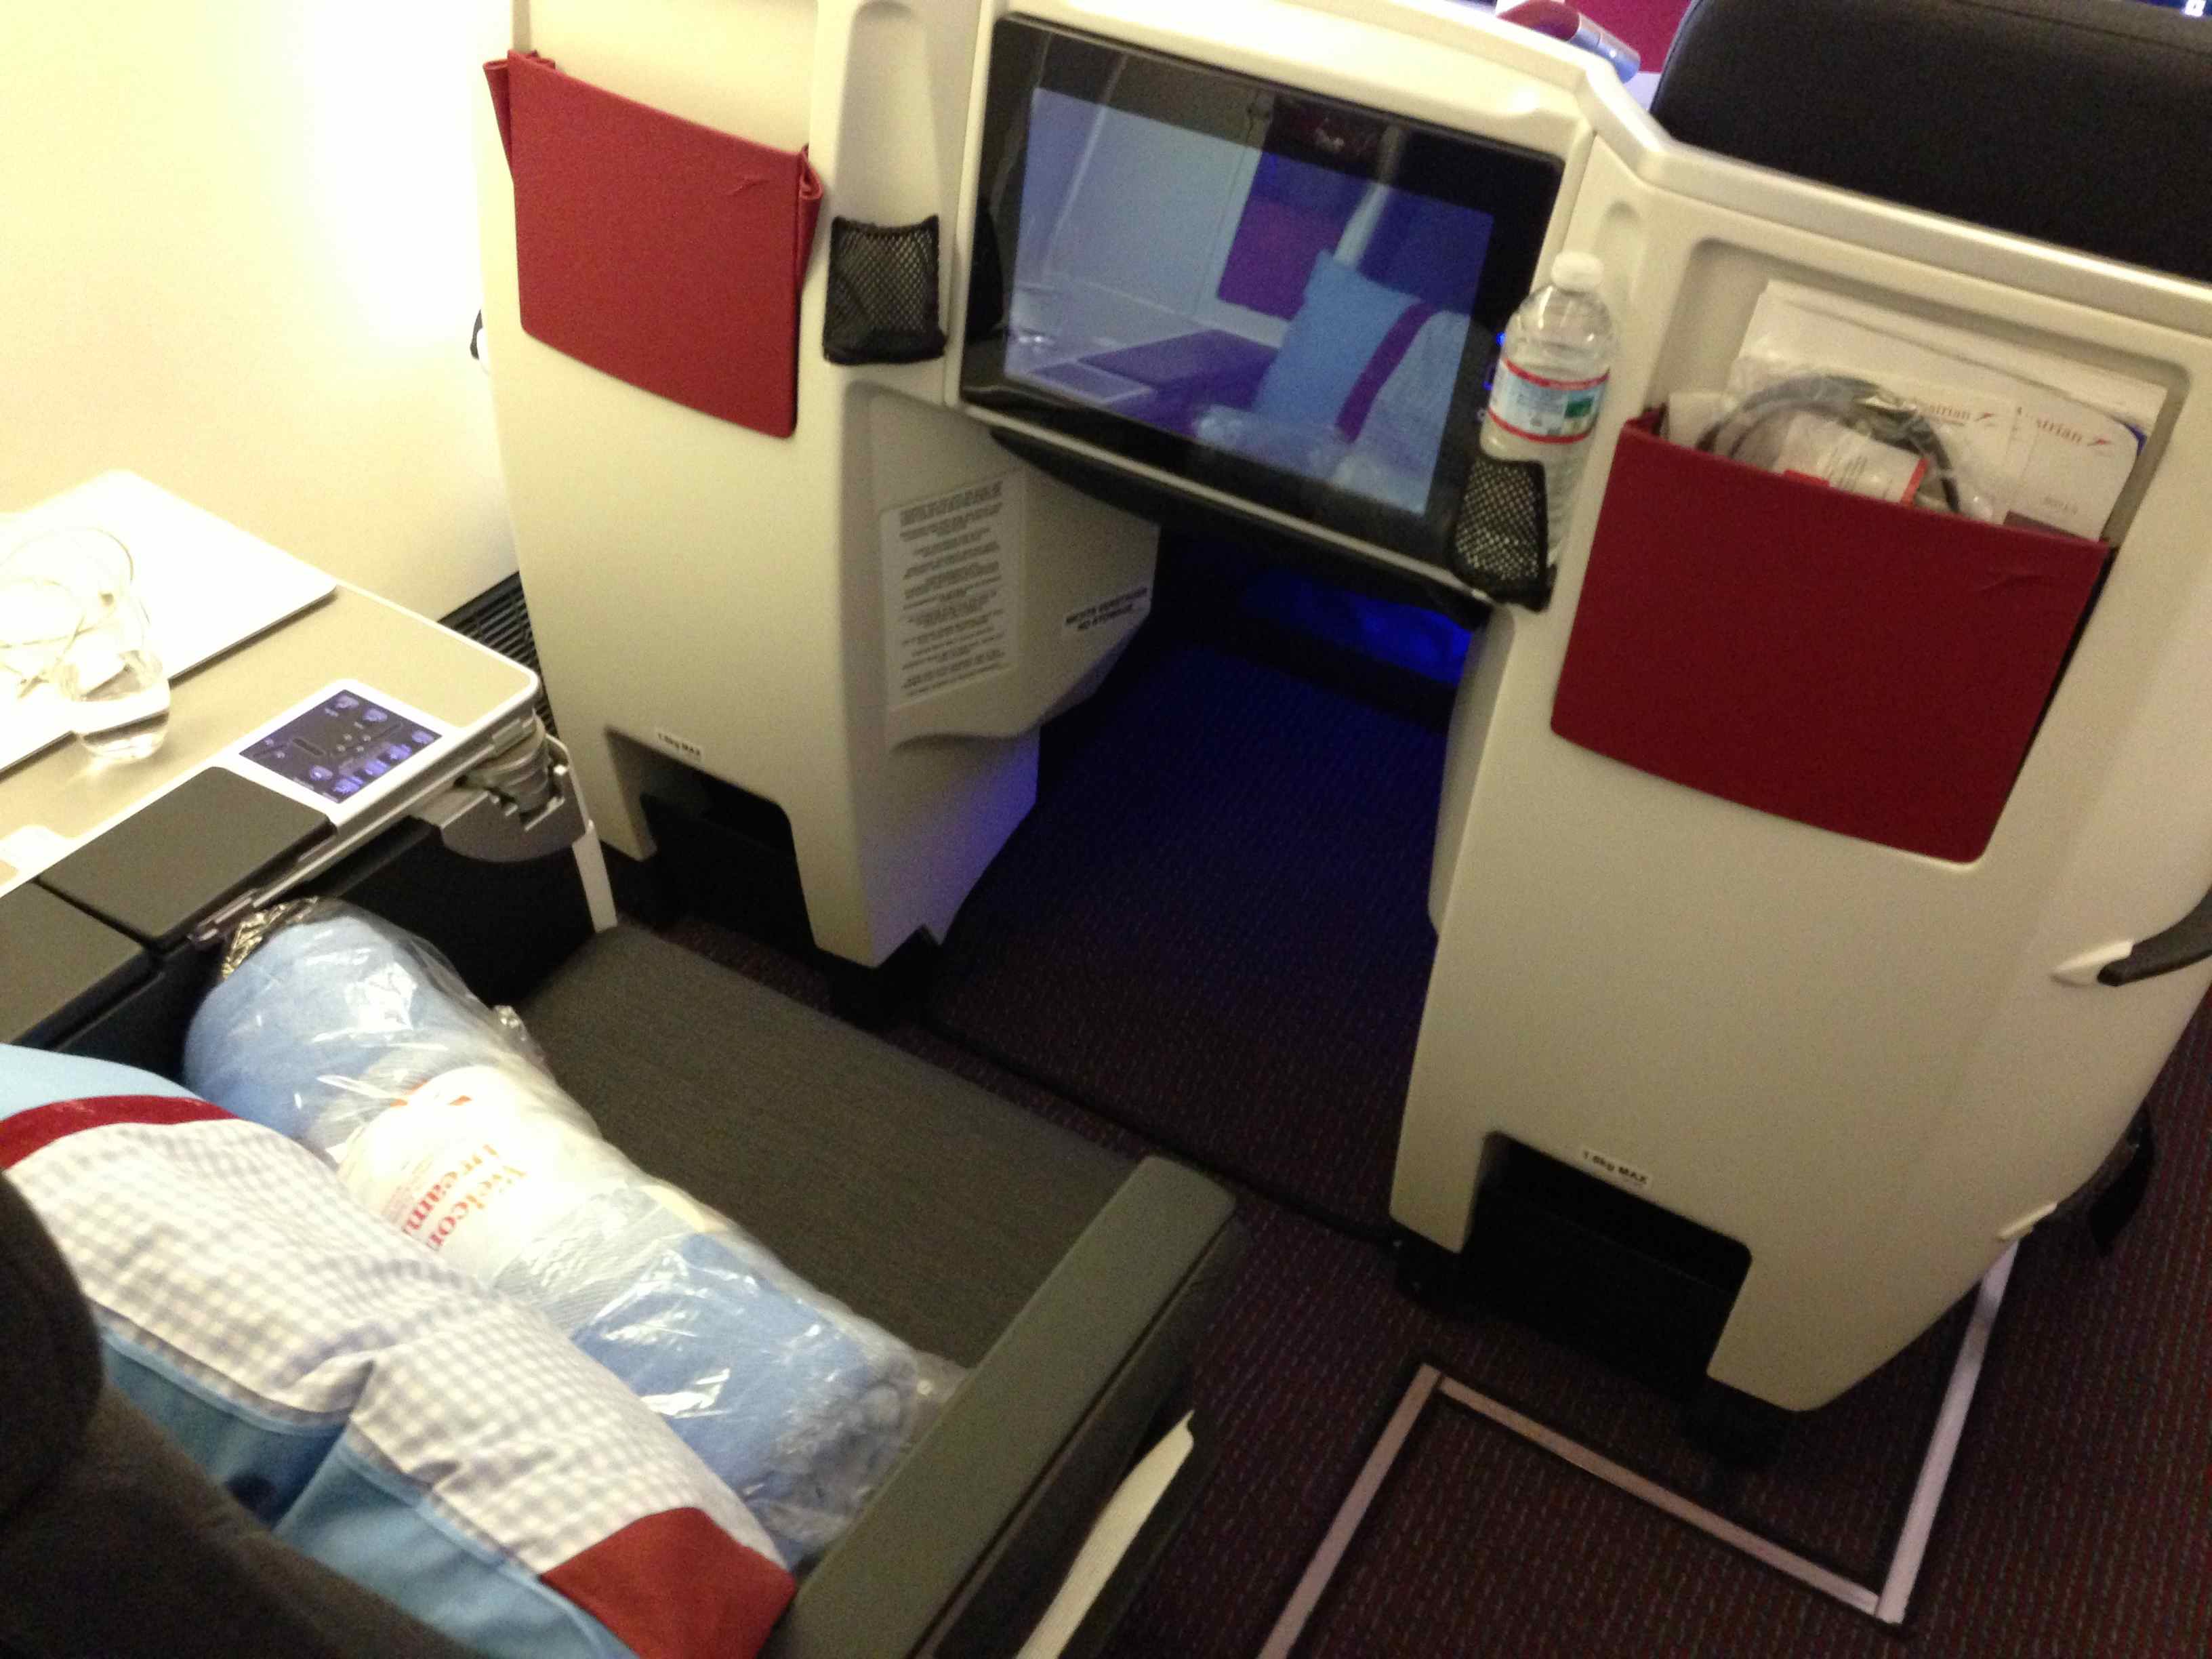 Austrian Airlines around-the-world ticket ANA business class